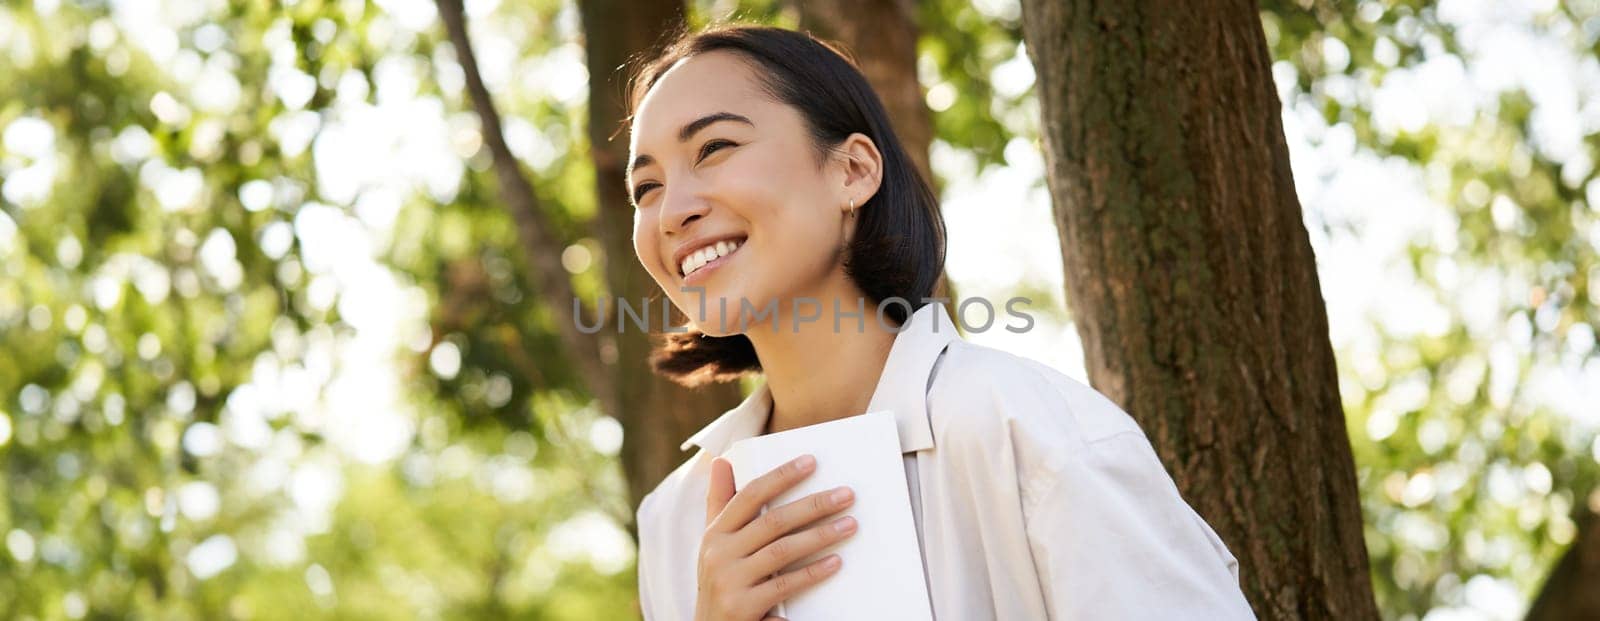 Romantic smiling girl reading book in park or foret, sitting under tree shade on sunny day, relaxing on fresh air surrounded by nature.